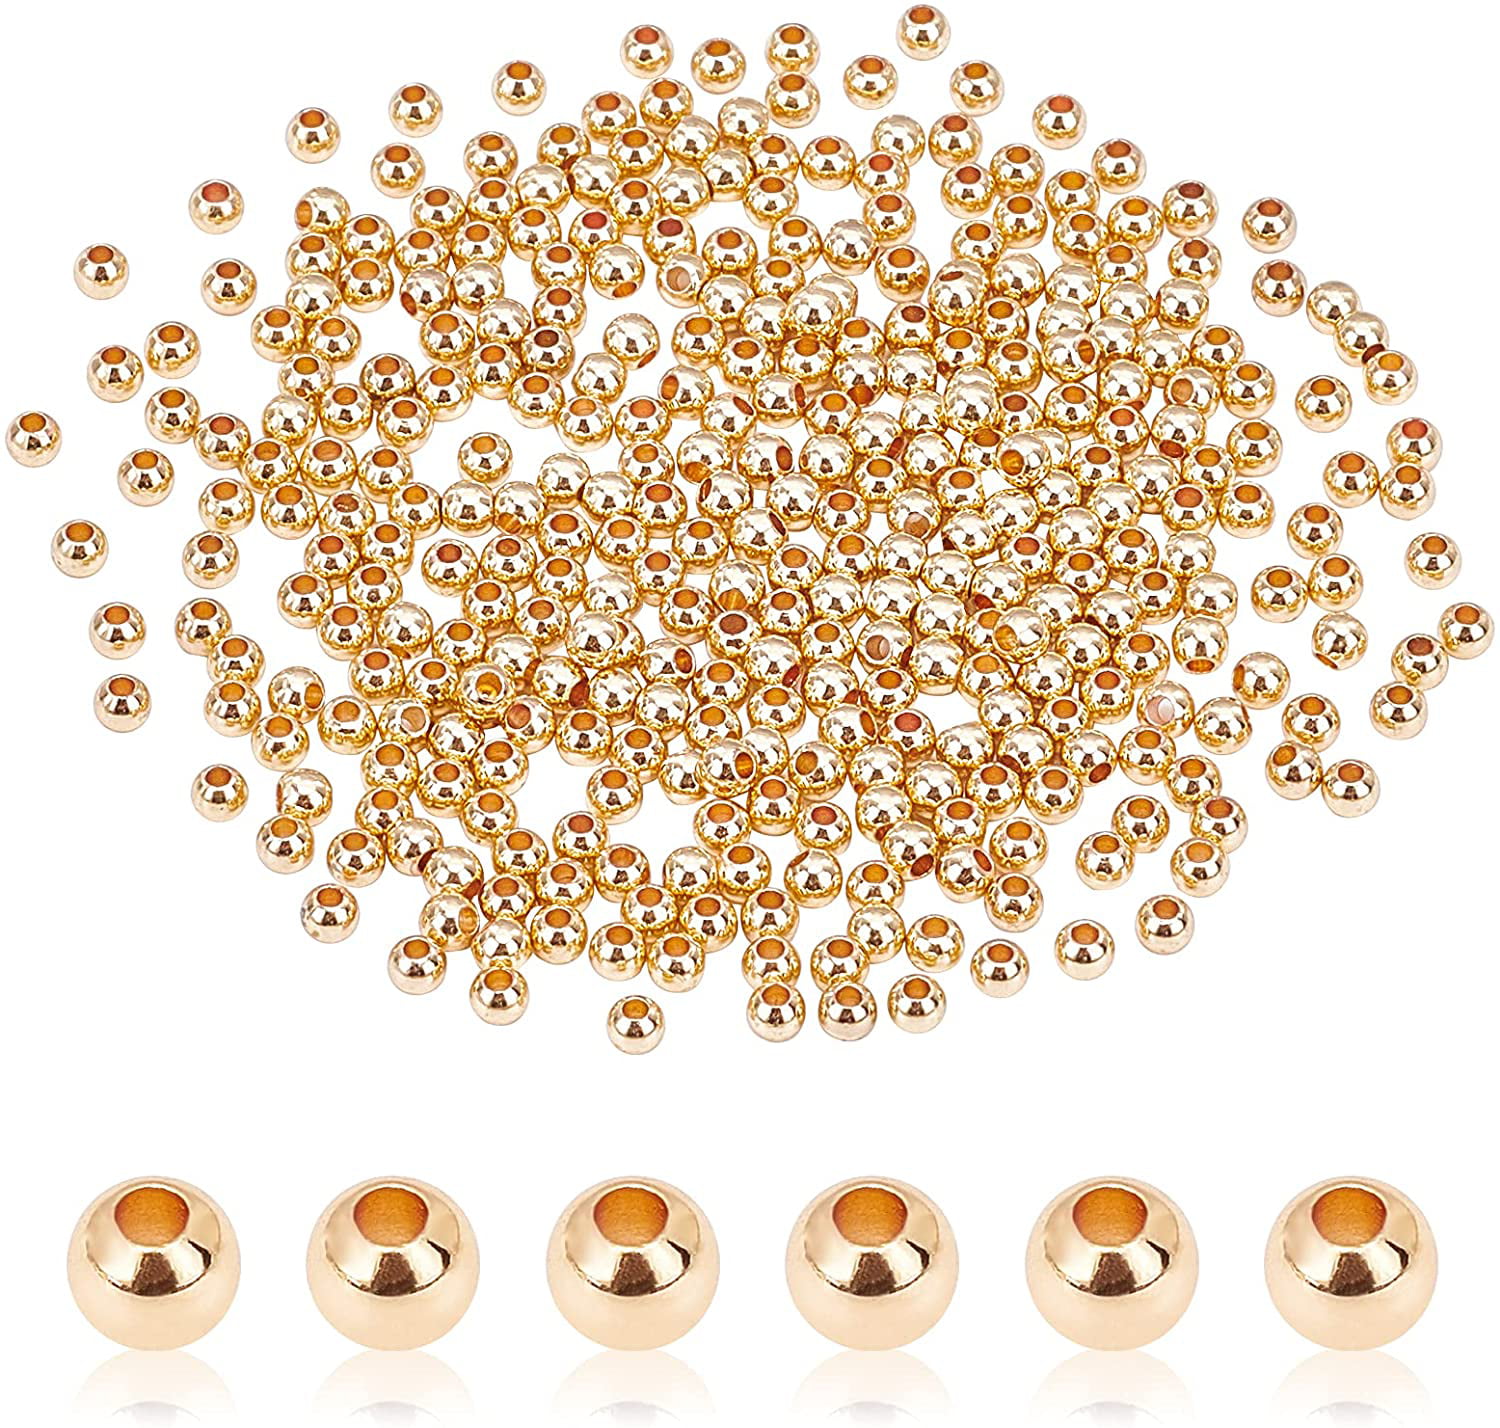 25 Gold Filled Round Seamless Ball Beads Jewelry 3mm 